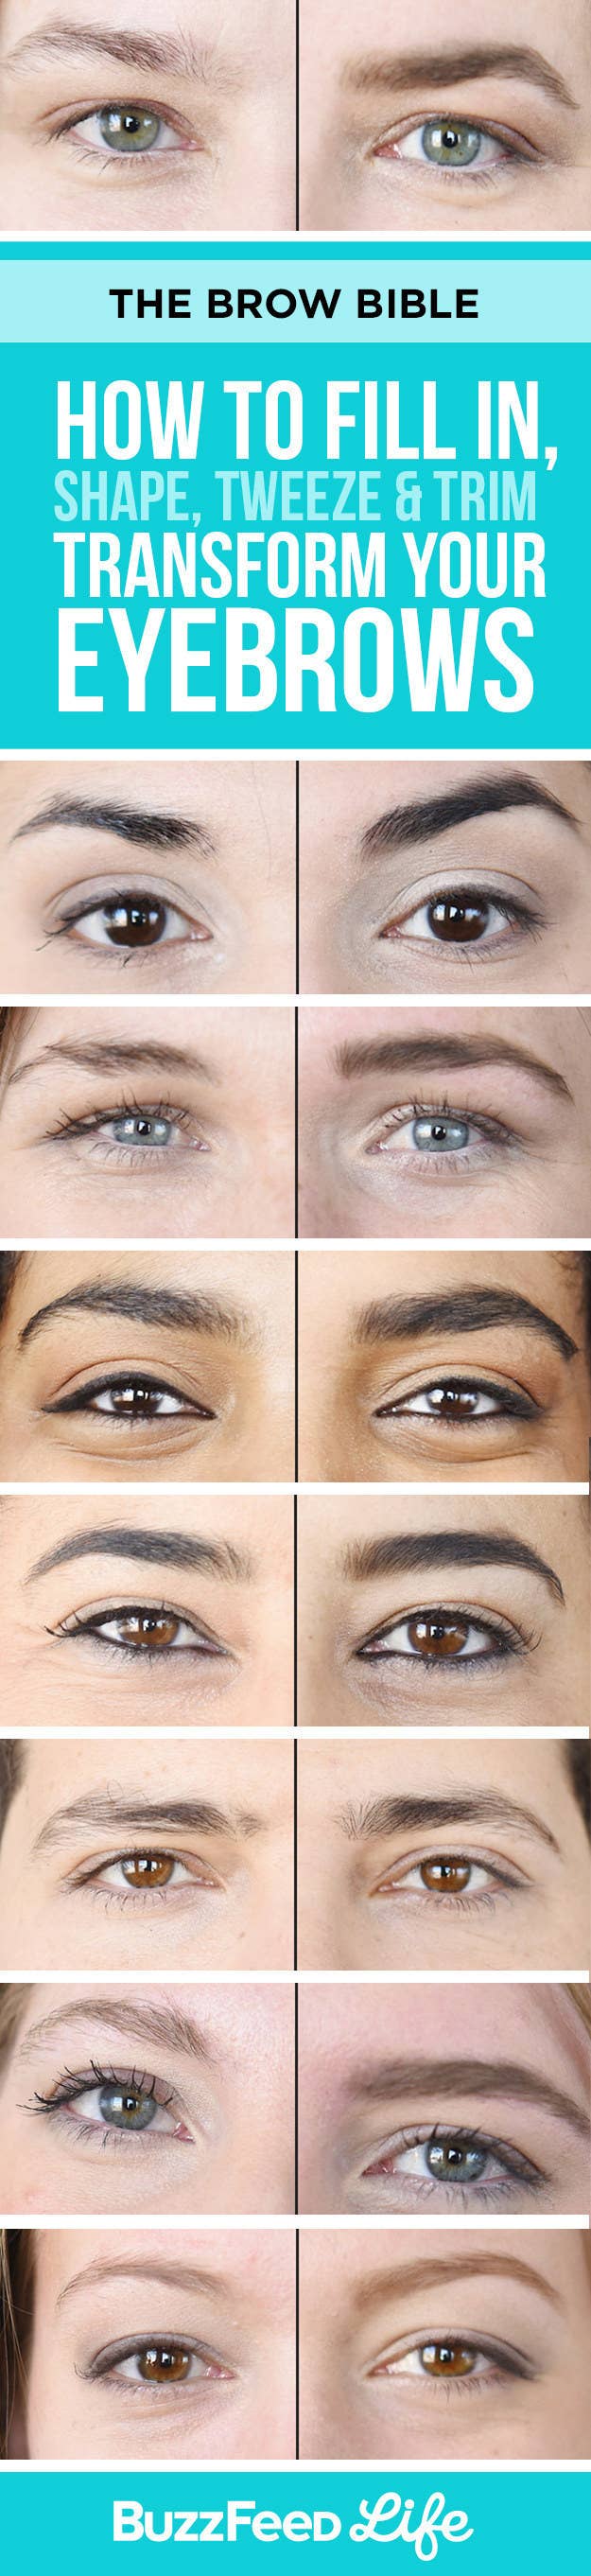 Sammenligne fatning modvirke How To Fill In, Shape, Tweeze, Trim, And Transform Your Eyebrows